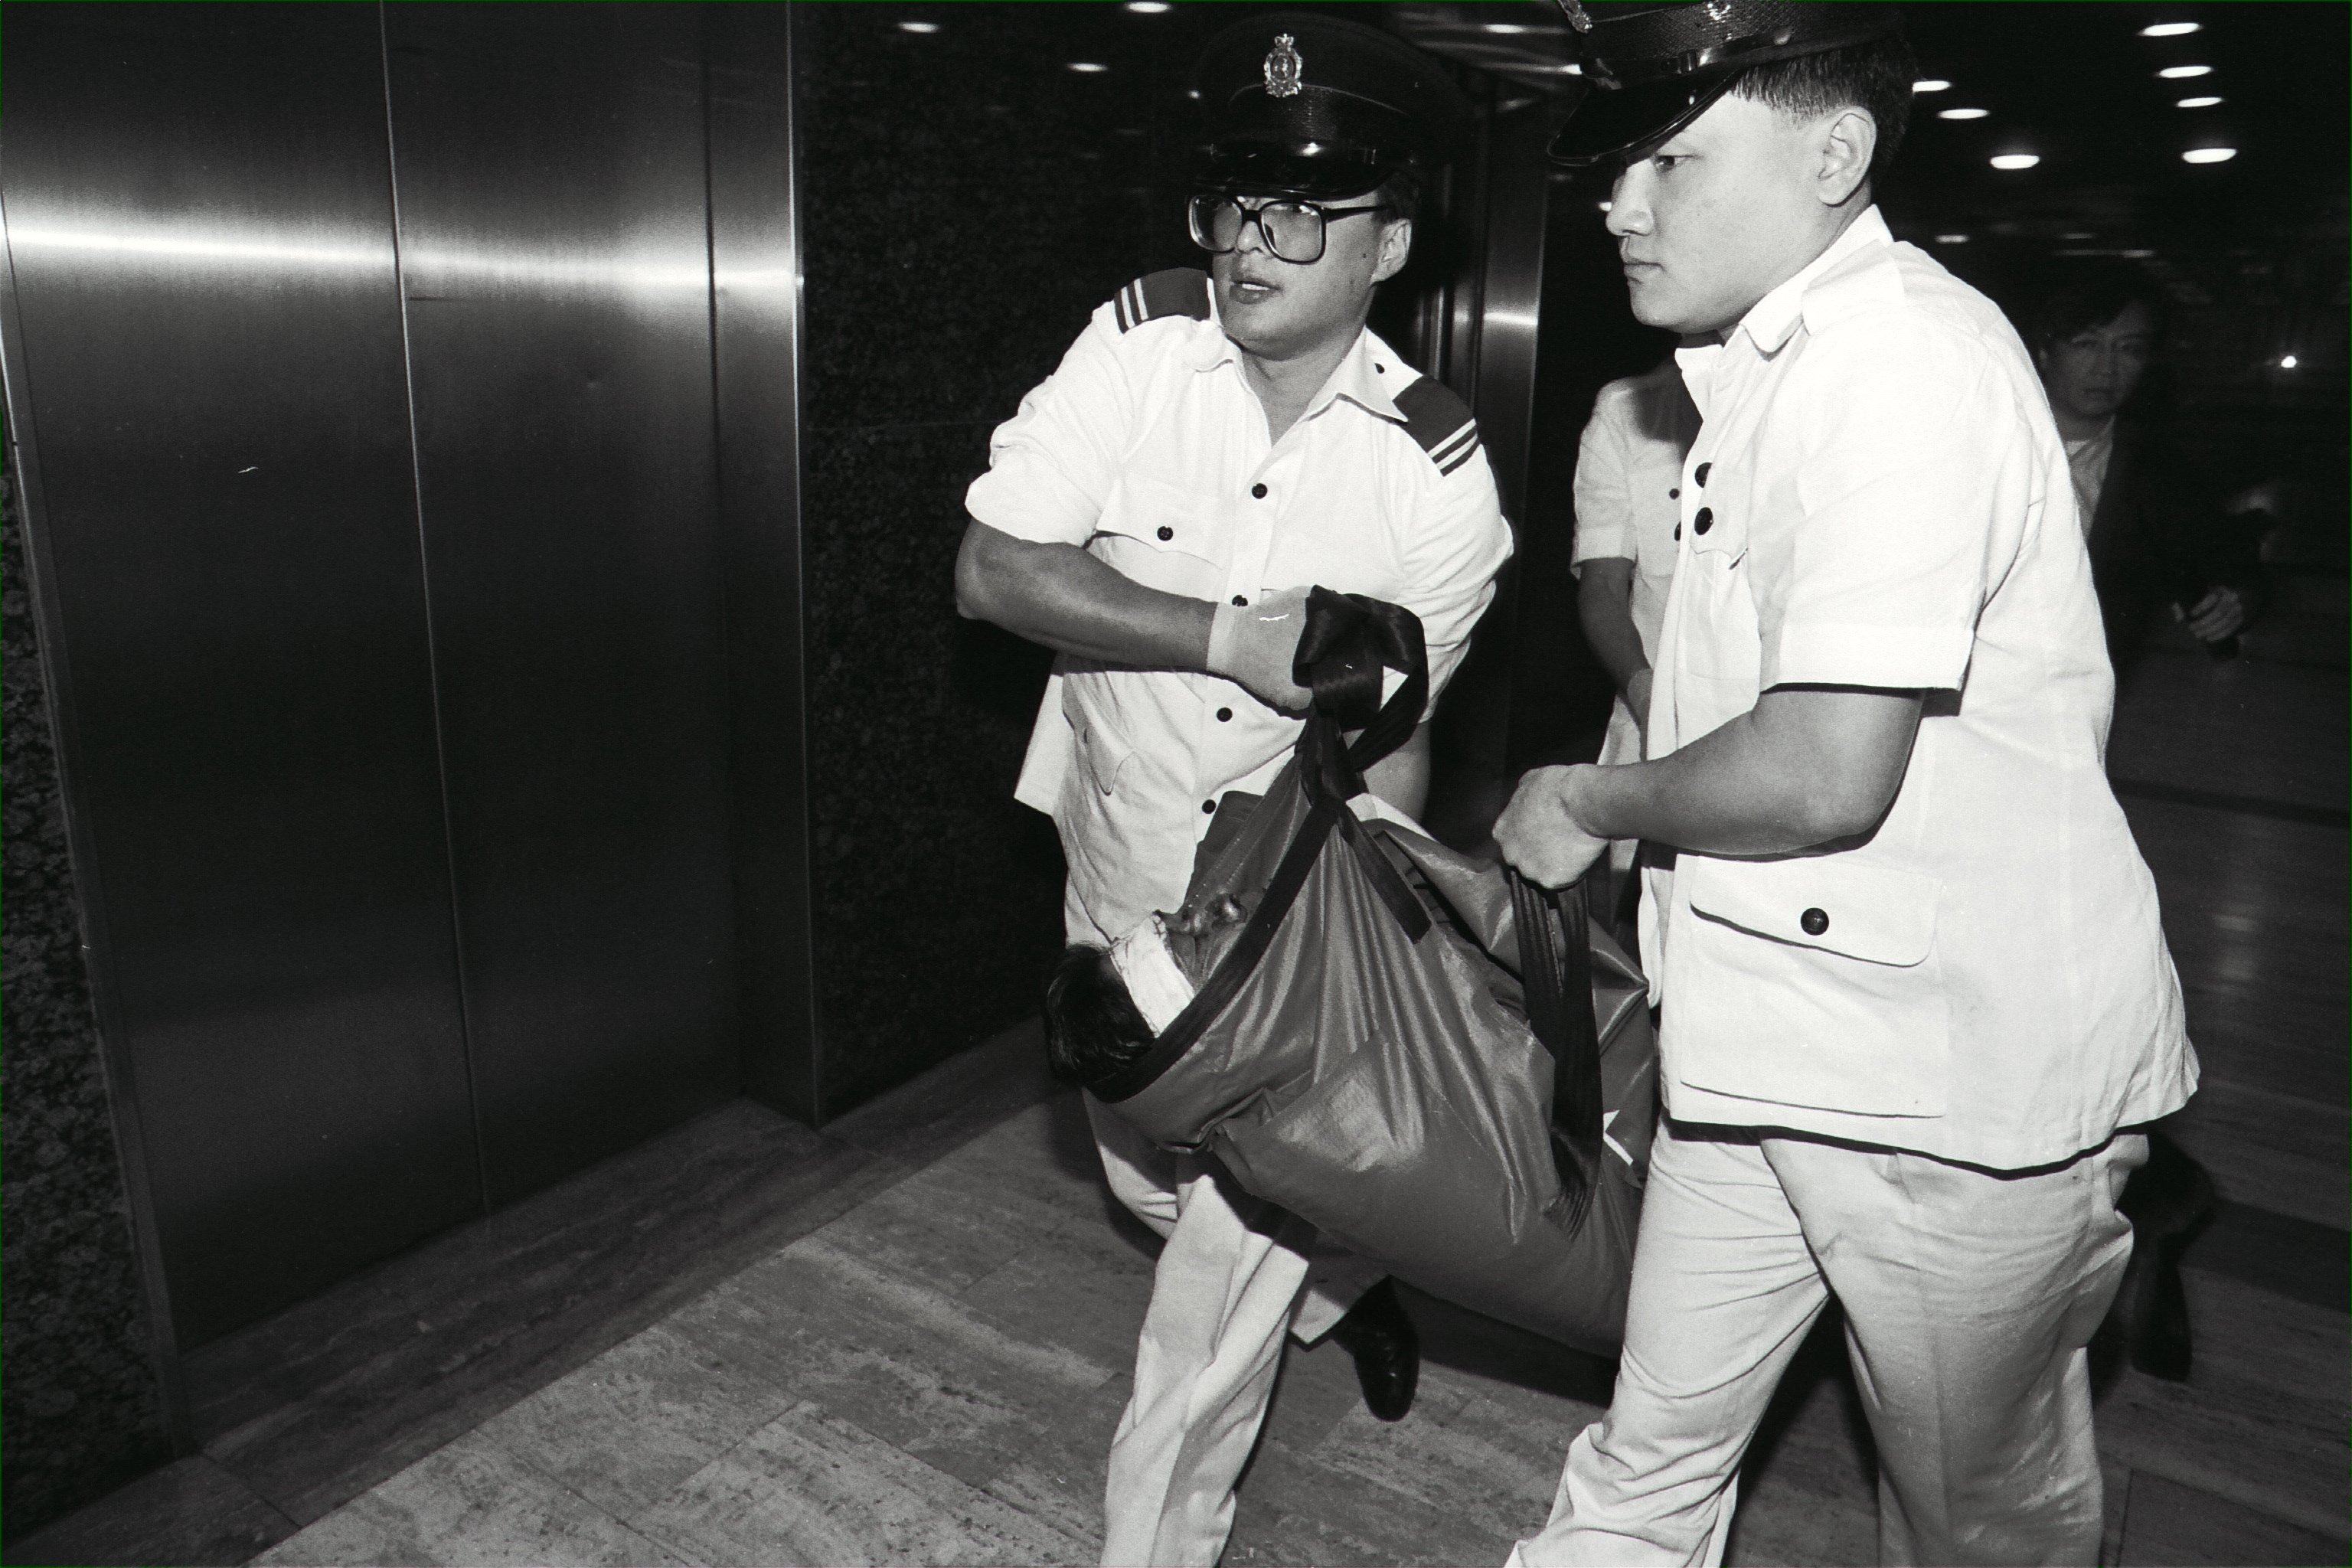 Ambulancemen rush Chinese martial arts actor Jet Li’s manager Choi Chi-ming to hospital after he was fatally shot in 1992 near his office in Hong Kong, in what police suspected was an underworld contract assassination. Choi had links to a 14K criminal gang. Photo: SCMP